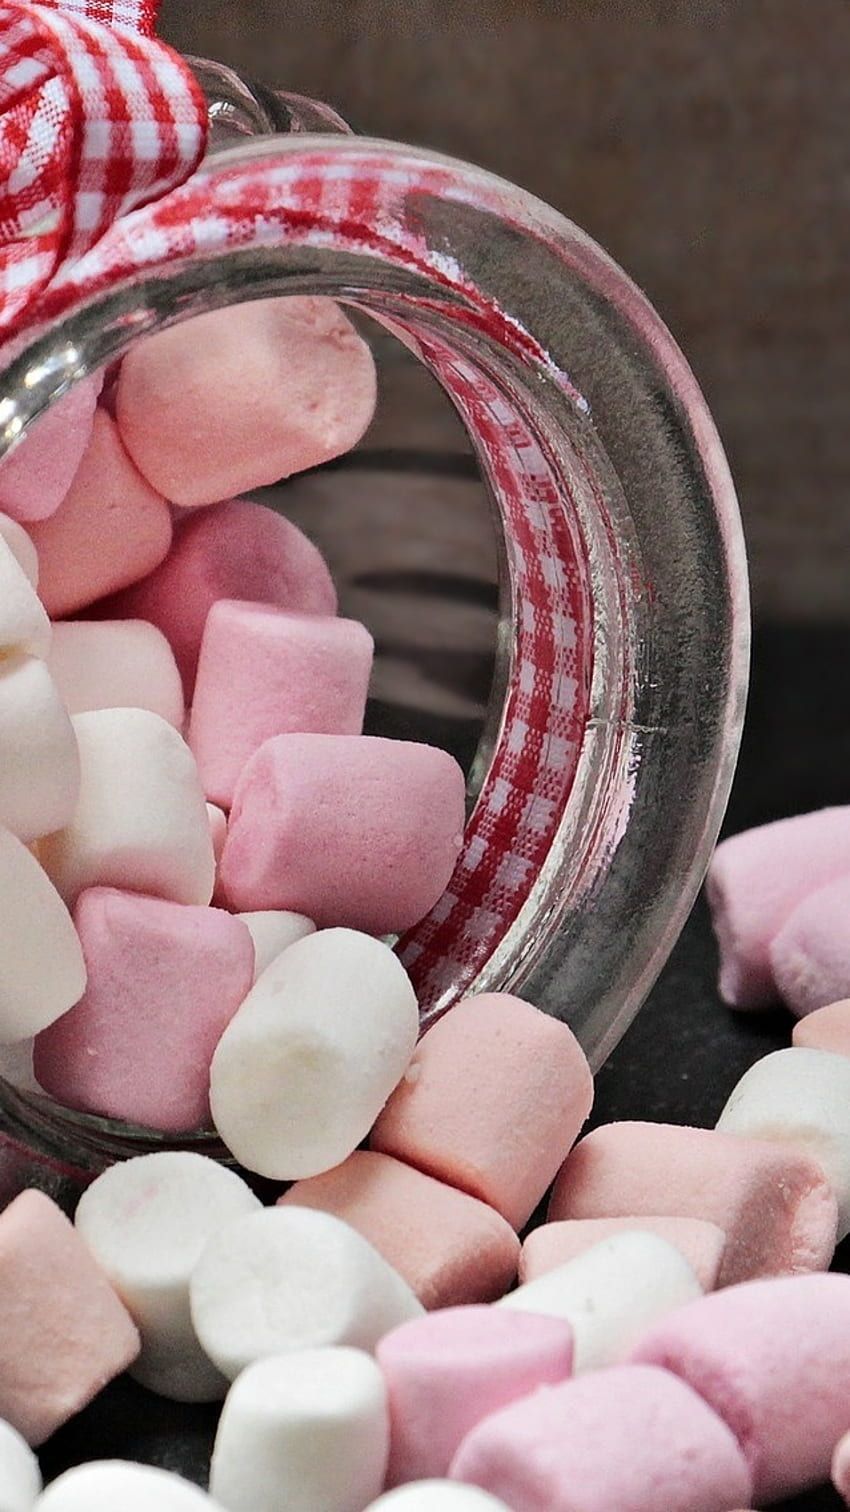 Pink and white marshmallows spilling out of a jar. - Marshmallows